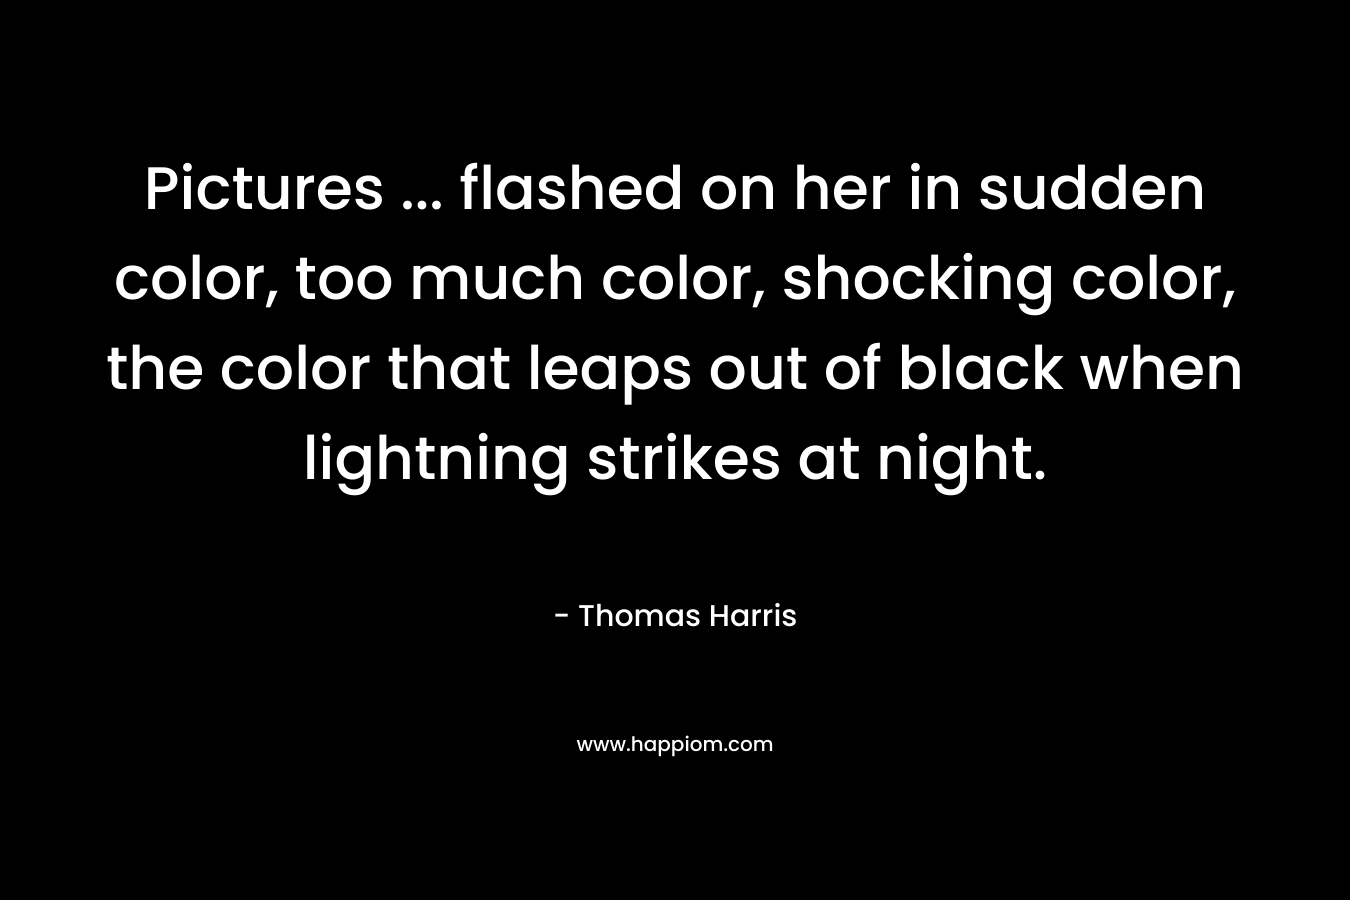 Pictures ... flashed on her in sudden color, too much color, shocking color, the color that leaps out of black when lightning strikes at night.